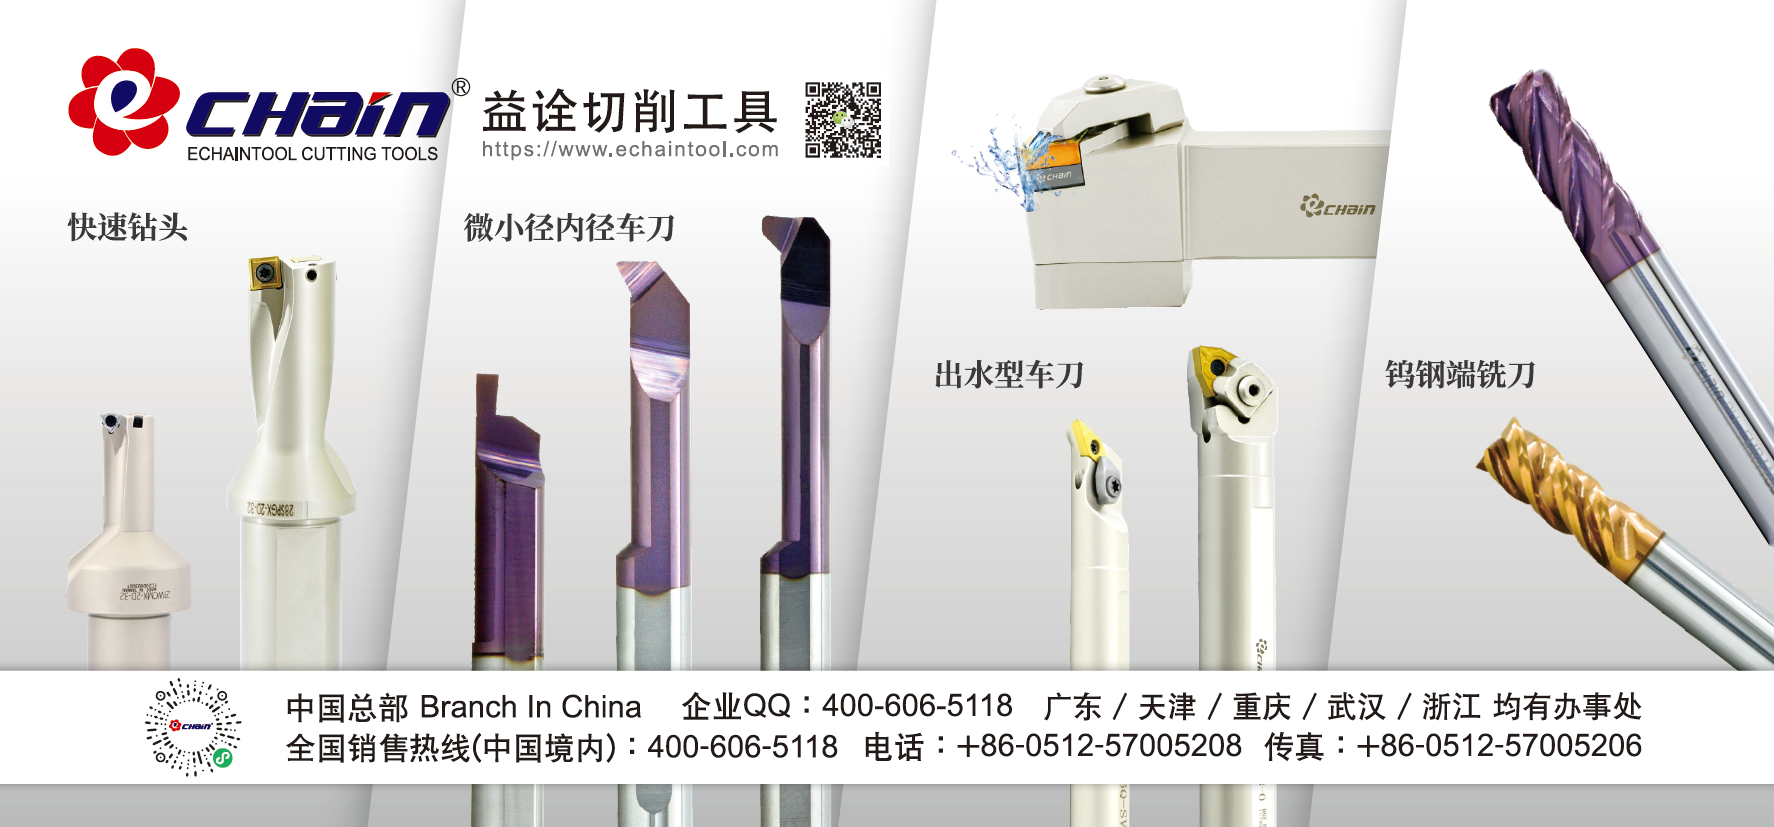 Top brand Cutting tools suppliers in Taiwan is Echaintool Industry.